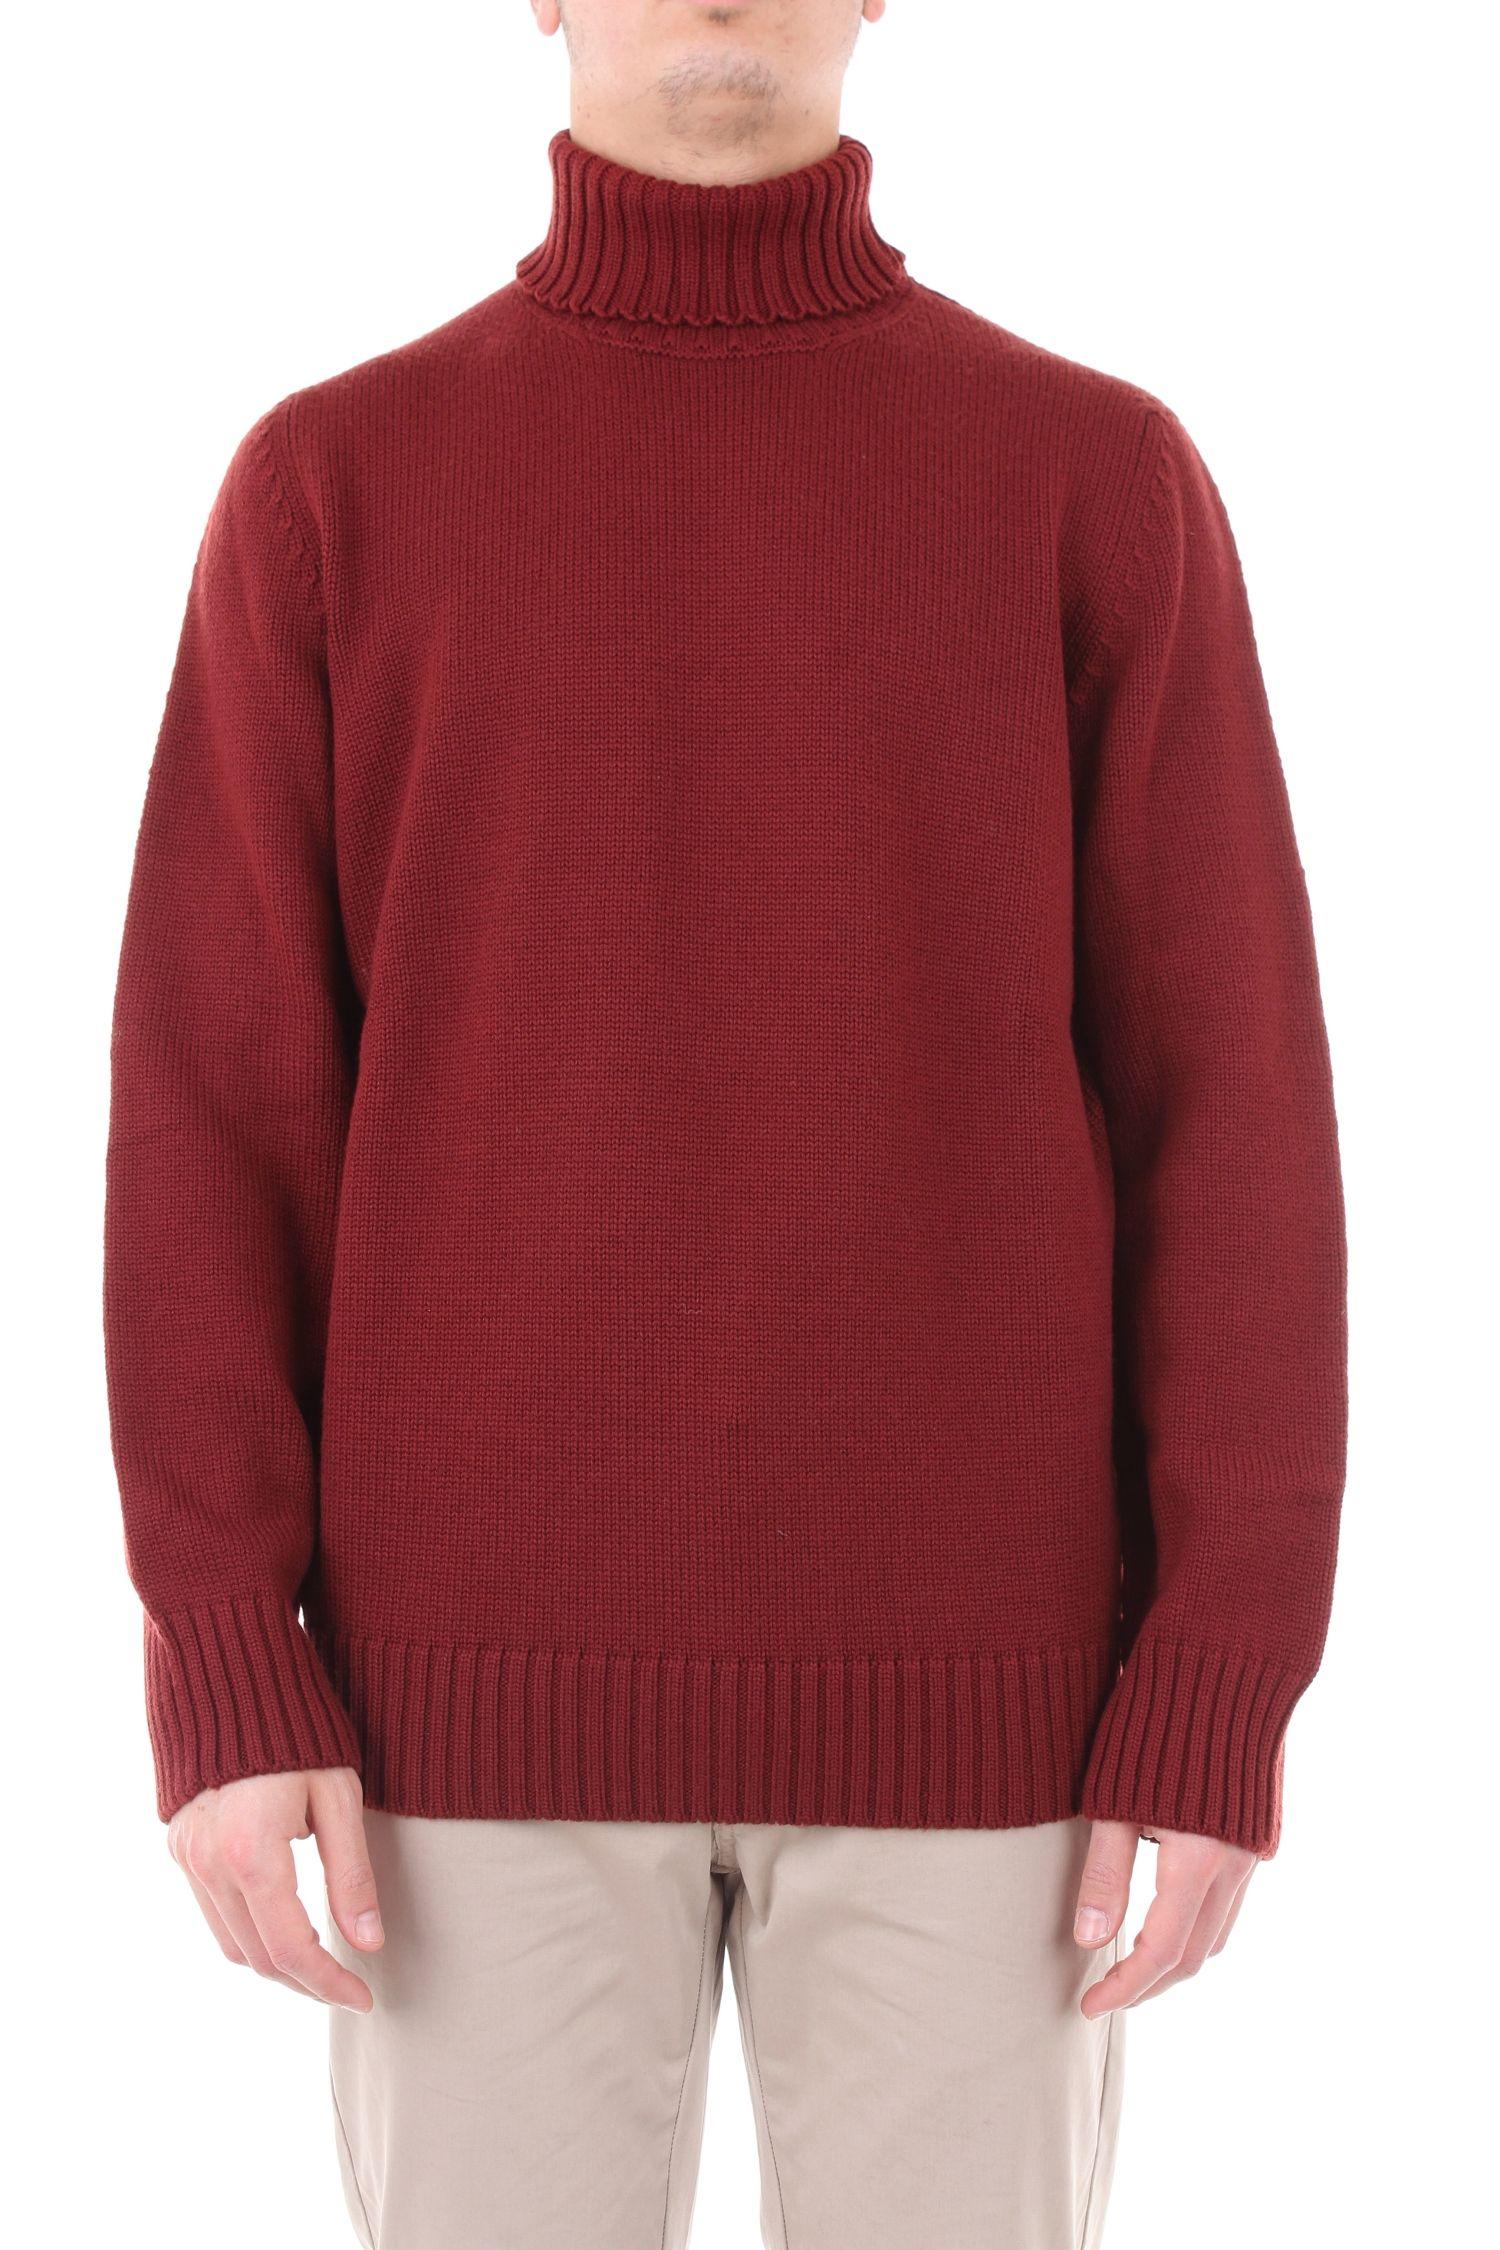 Drumohr Red Wool Sweater in Red for Men - Lyst